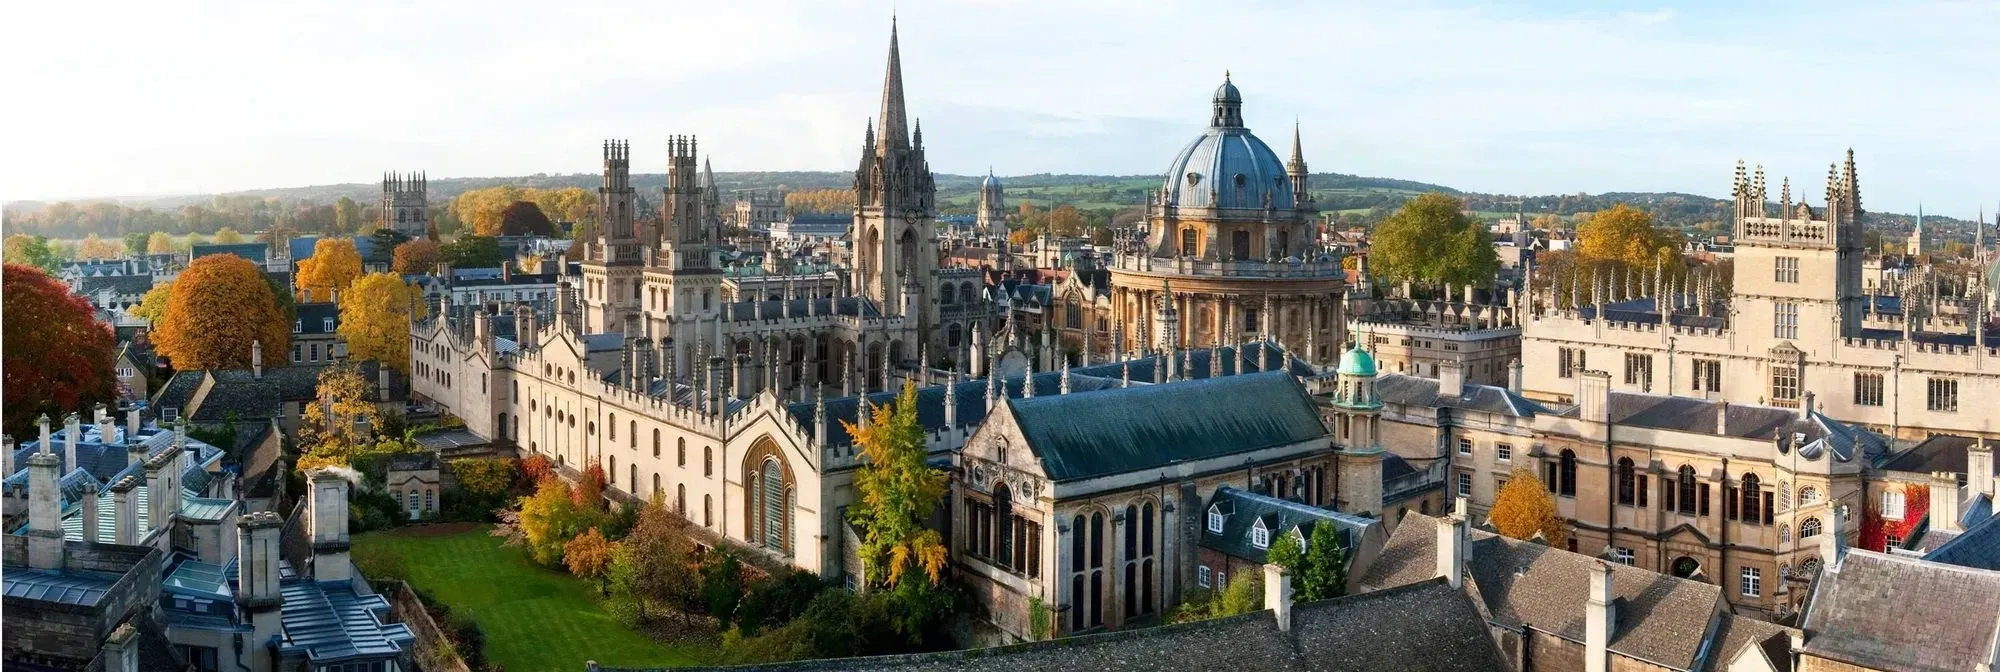 This is a two-hour walking tour of Oxford to explore the beauty and history of the city. Buy Oxford walking tour tickets. 